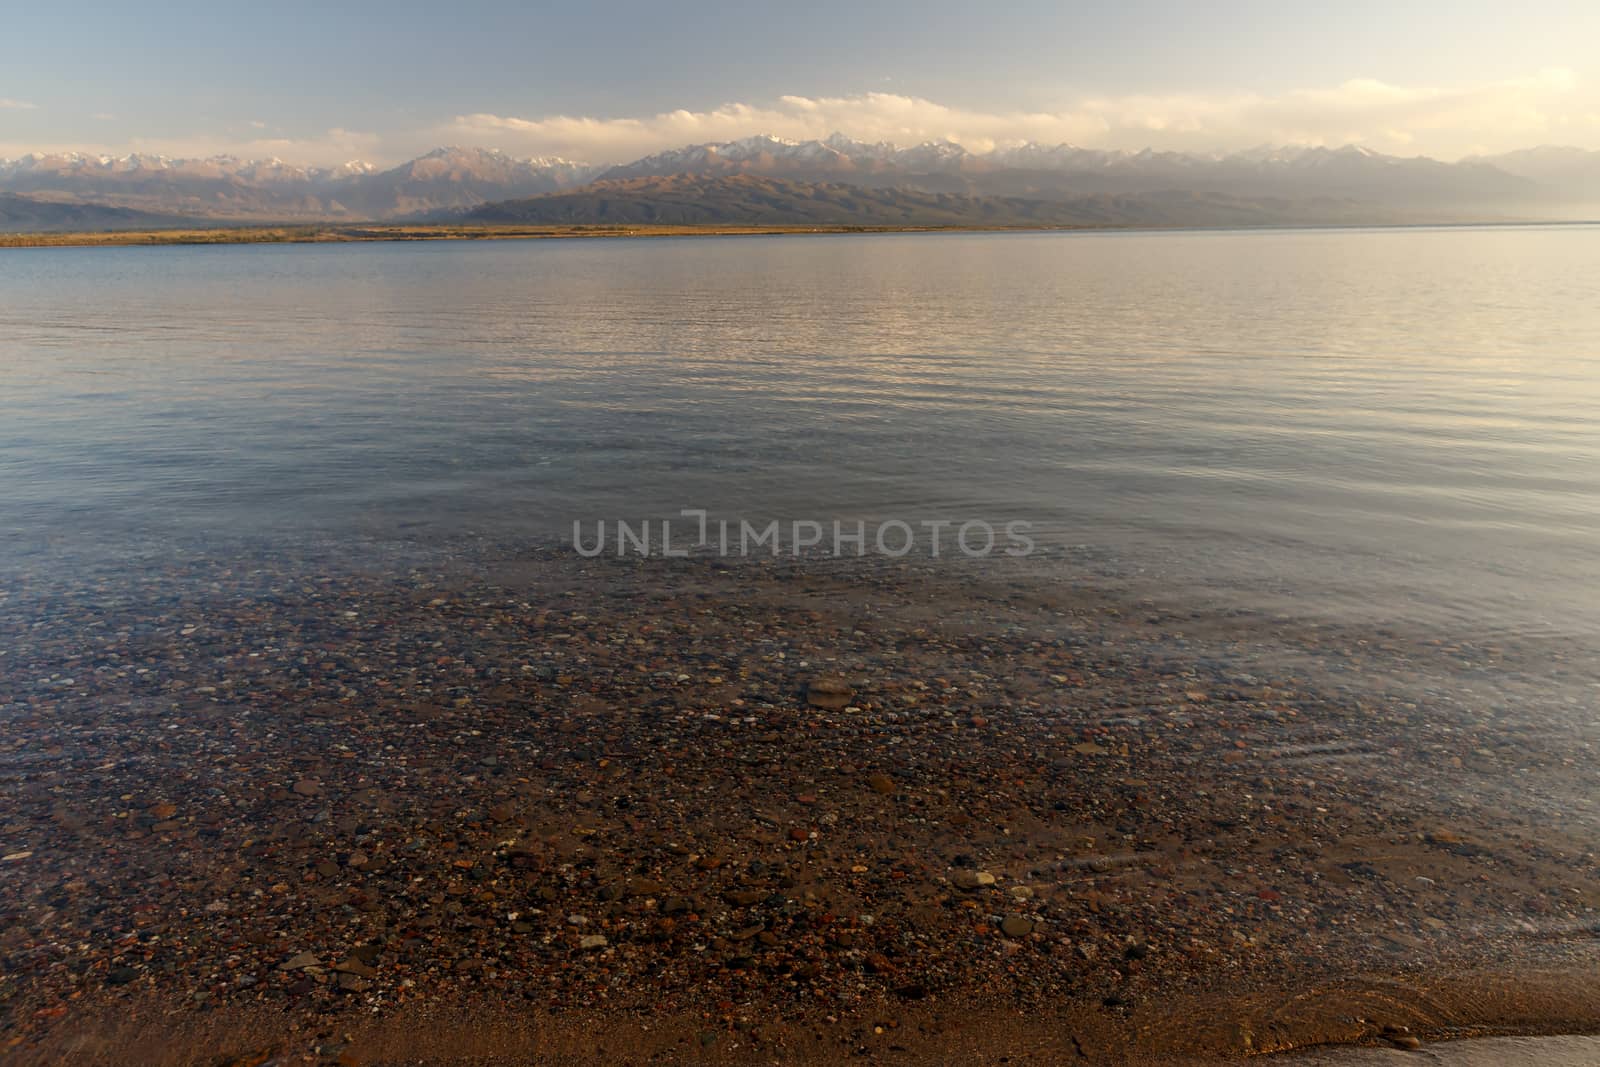 South shore of Issyk-kul lake in Kyrgyzstan, clear water in the lake and mountains with snowy peaks in the background